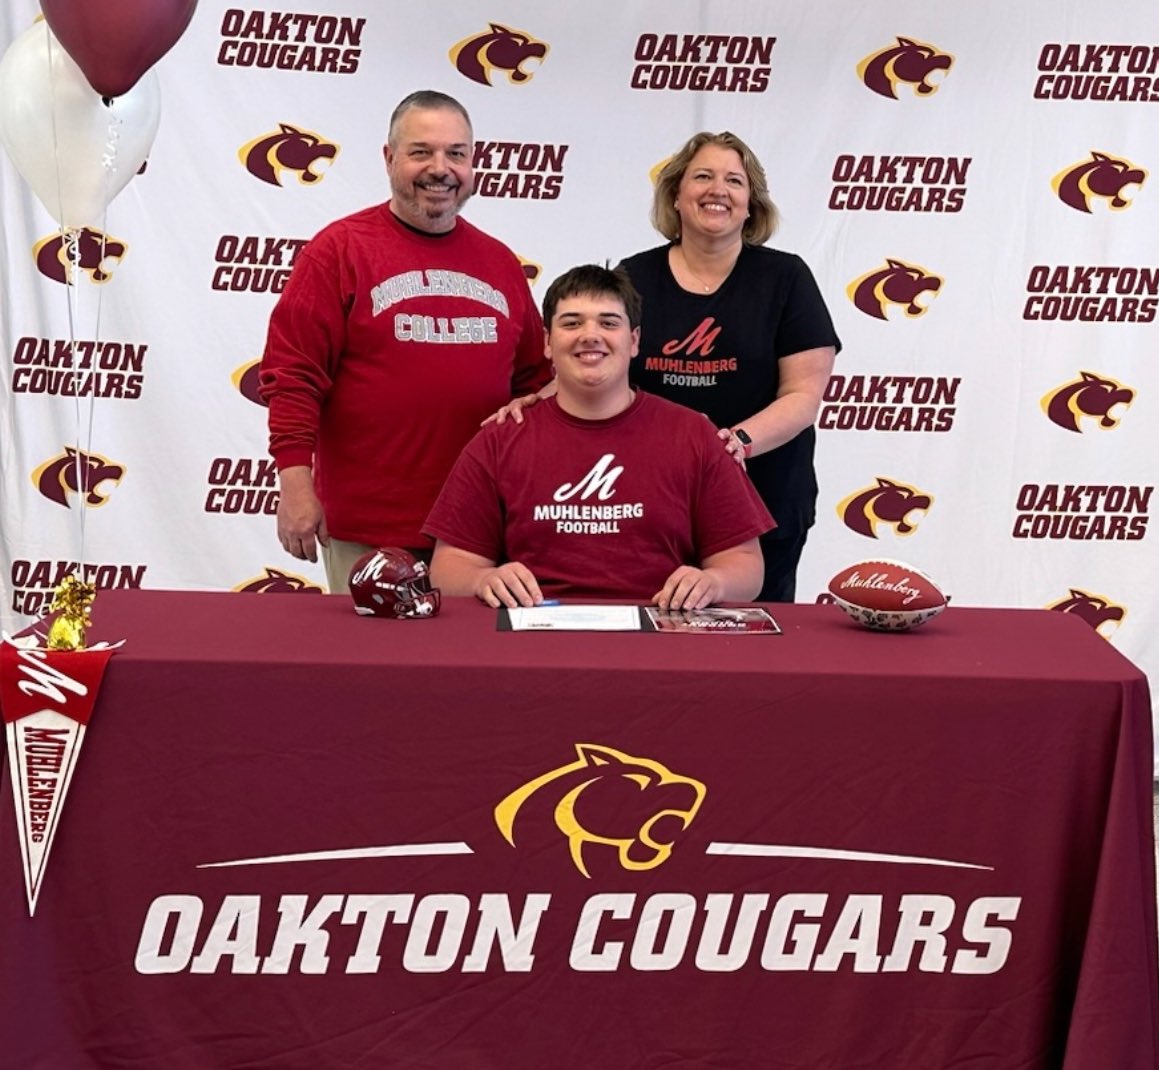 A great signing day for David at Oakton HS. Can’t wait for football season to begin at Muhlenberg College! 

@david_jansons @SonjaJansons @OaktonFootball @DigInMules @Muhl_Sports